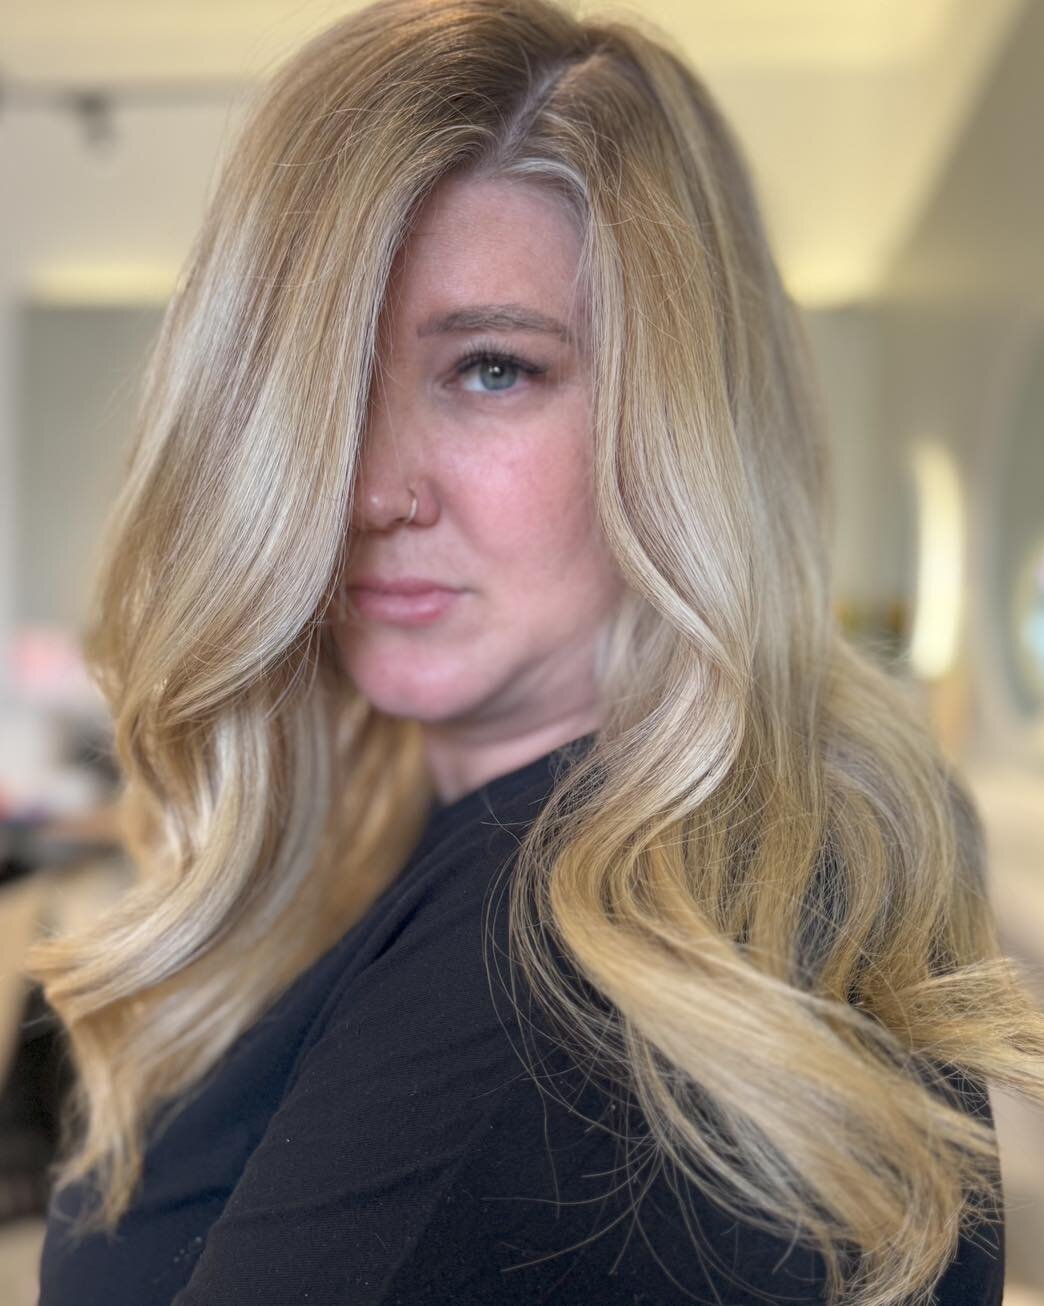 Brightening up your feed with this blonde transformation ✨

#hairdresserfiztroy #hairdressercliftonhill #firzroy #blonde #blondesalon #melbournesalon #transformation #blondespecialist #dyson #ghd LA BIOSTHETIQUE AUSTRALIA R+Co BLEU @oribe @framar